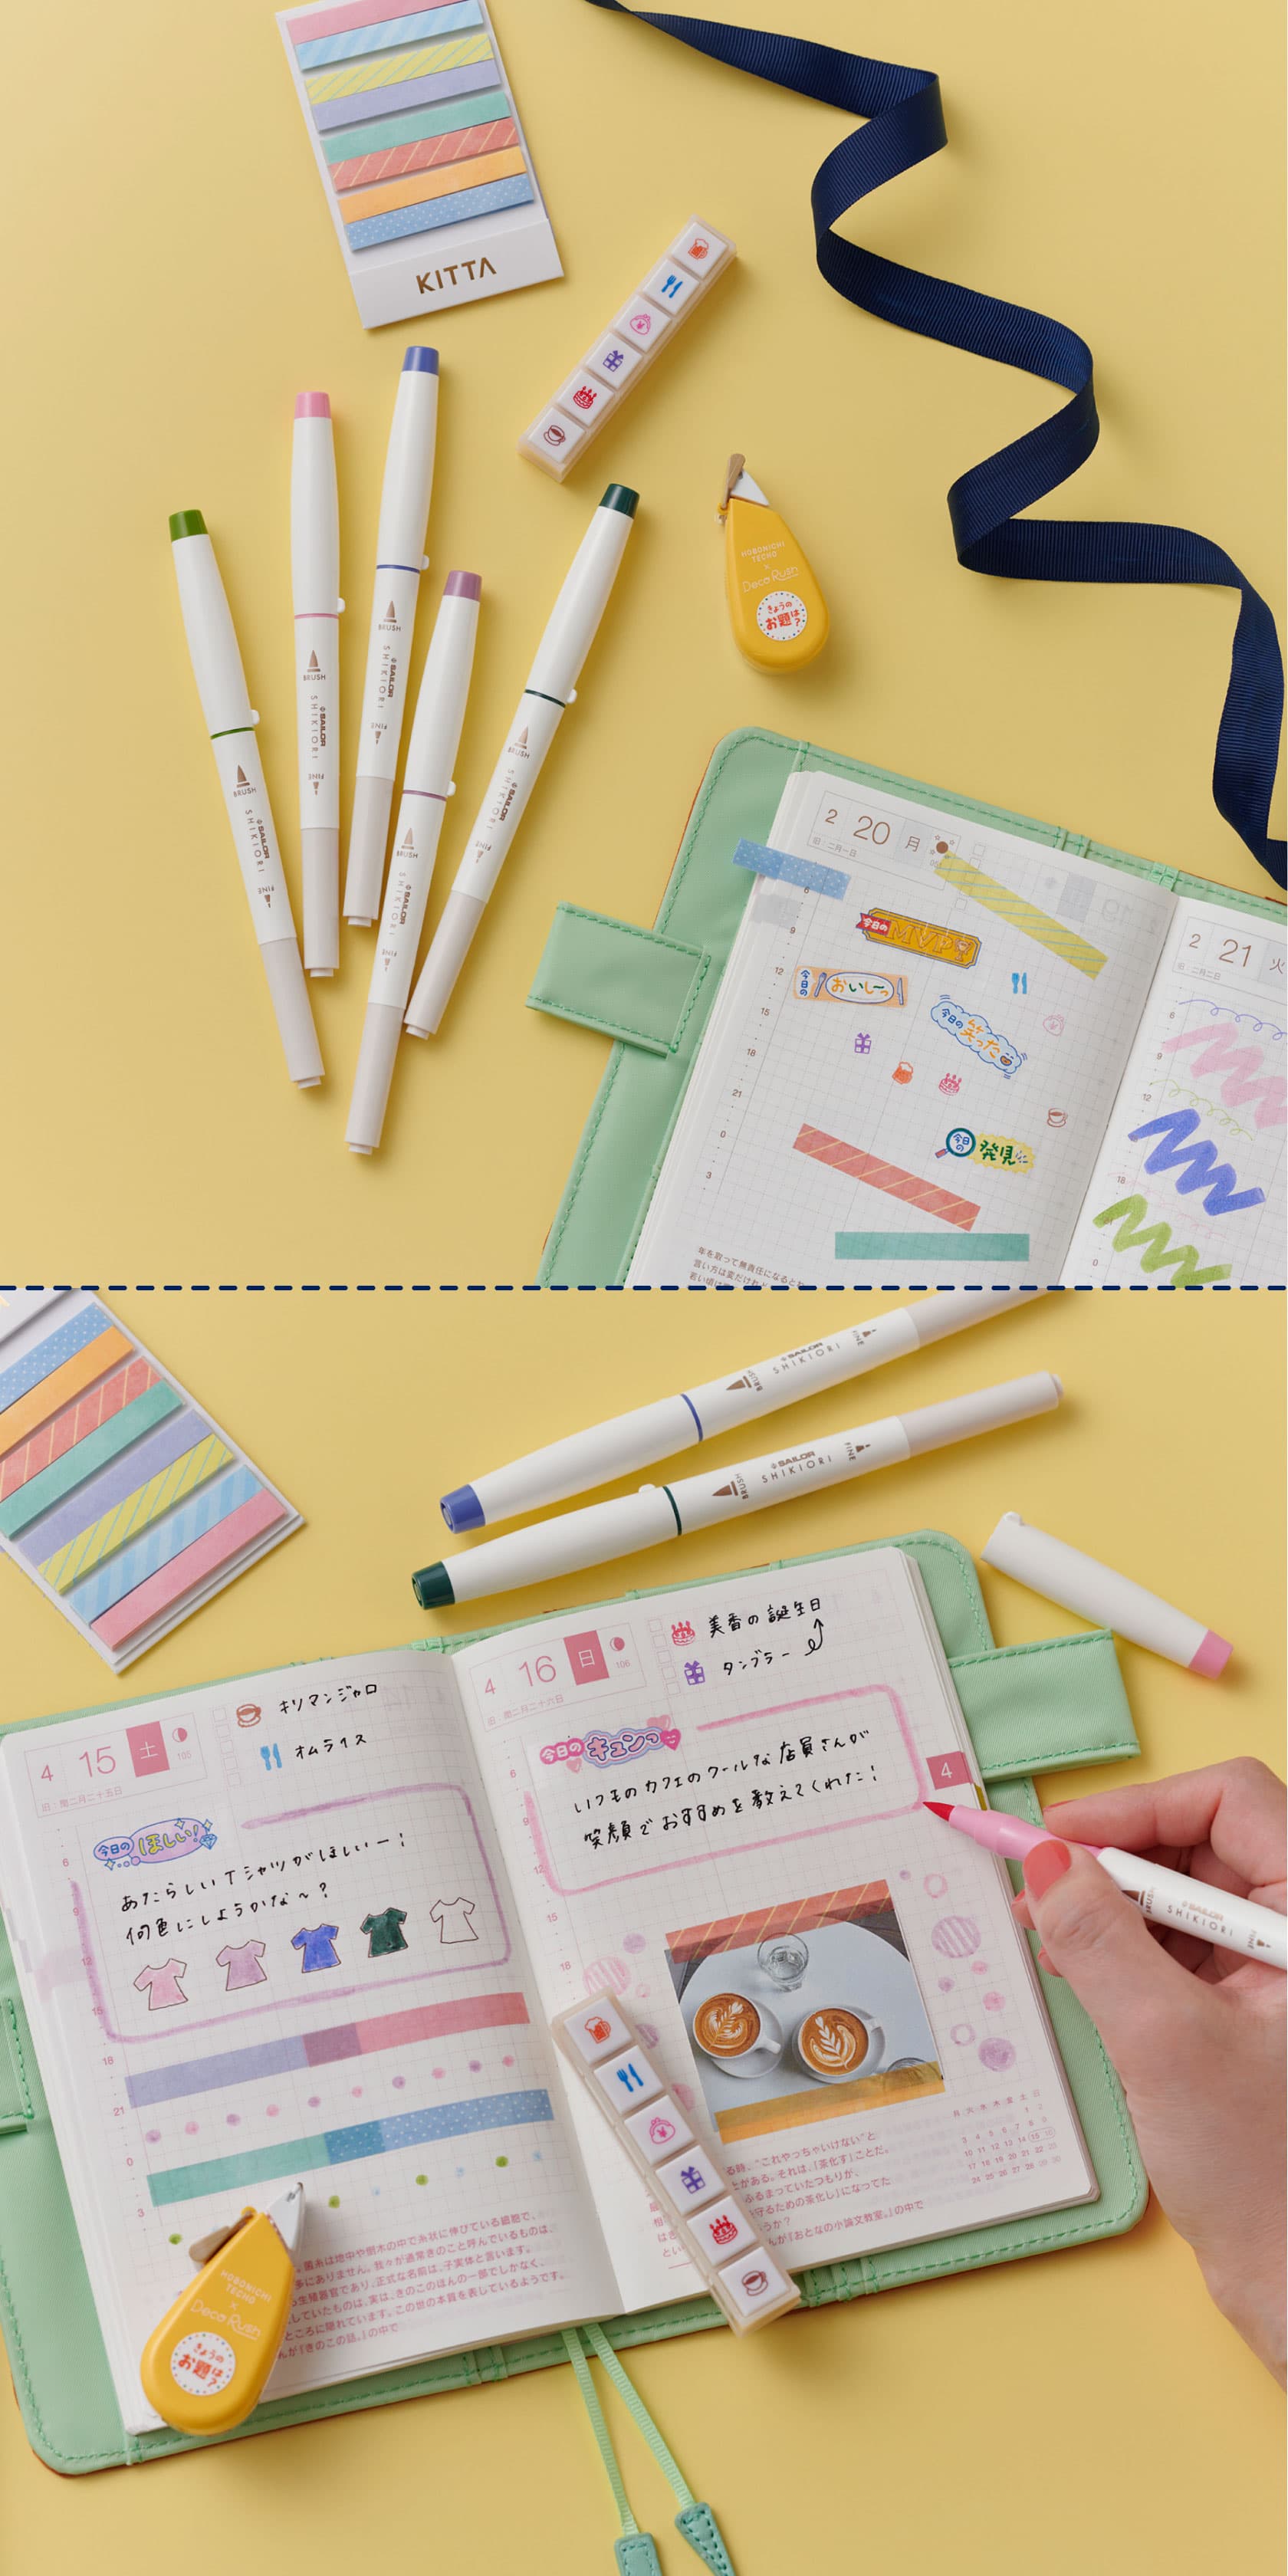 What are your fave stationary tools/accessories for your Hobonichi